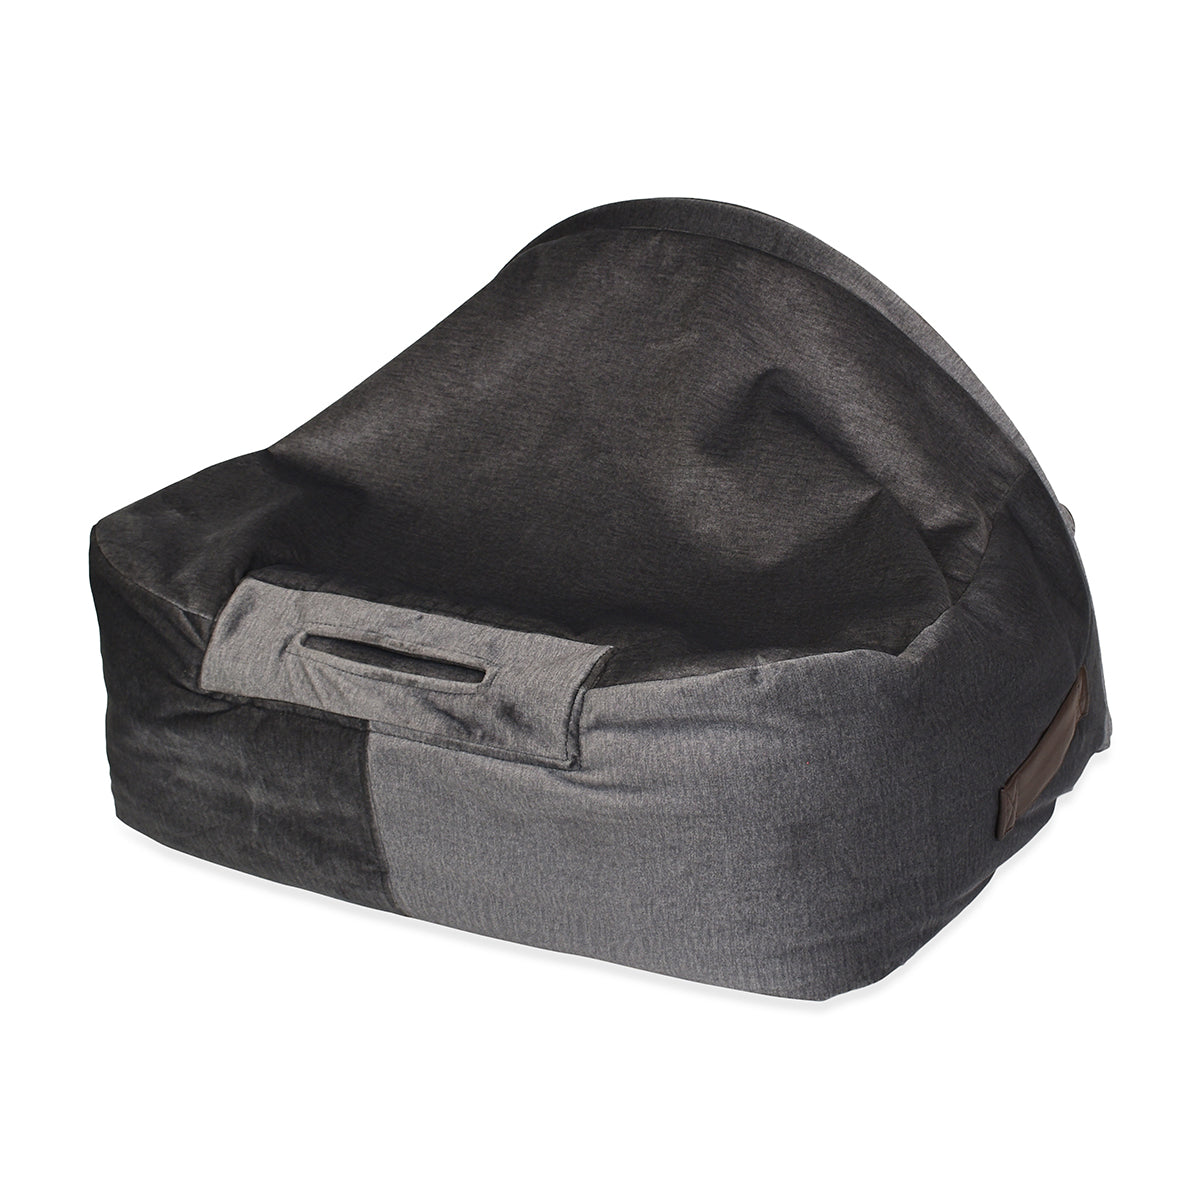 KONA CAVE® Luxury canopy cuddle cave den for burrowing dogs and cats in grey velvet with fluffy fleece lining.  Vegan leather handles and decorative piping on the corners.  Beautiful and high-quality luxury clam bed. 